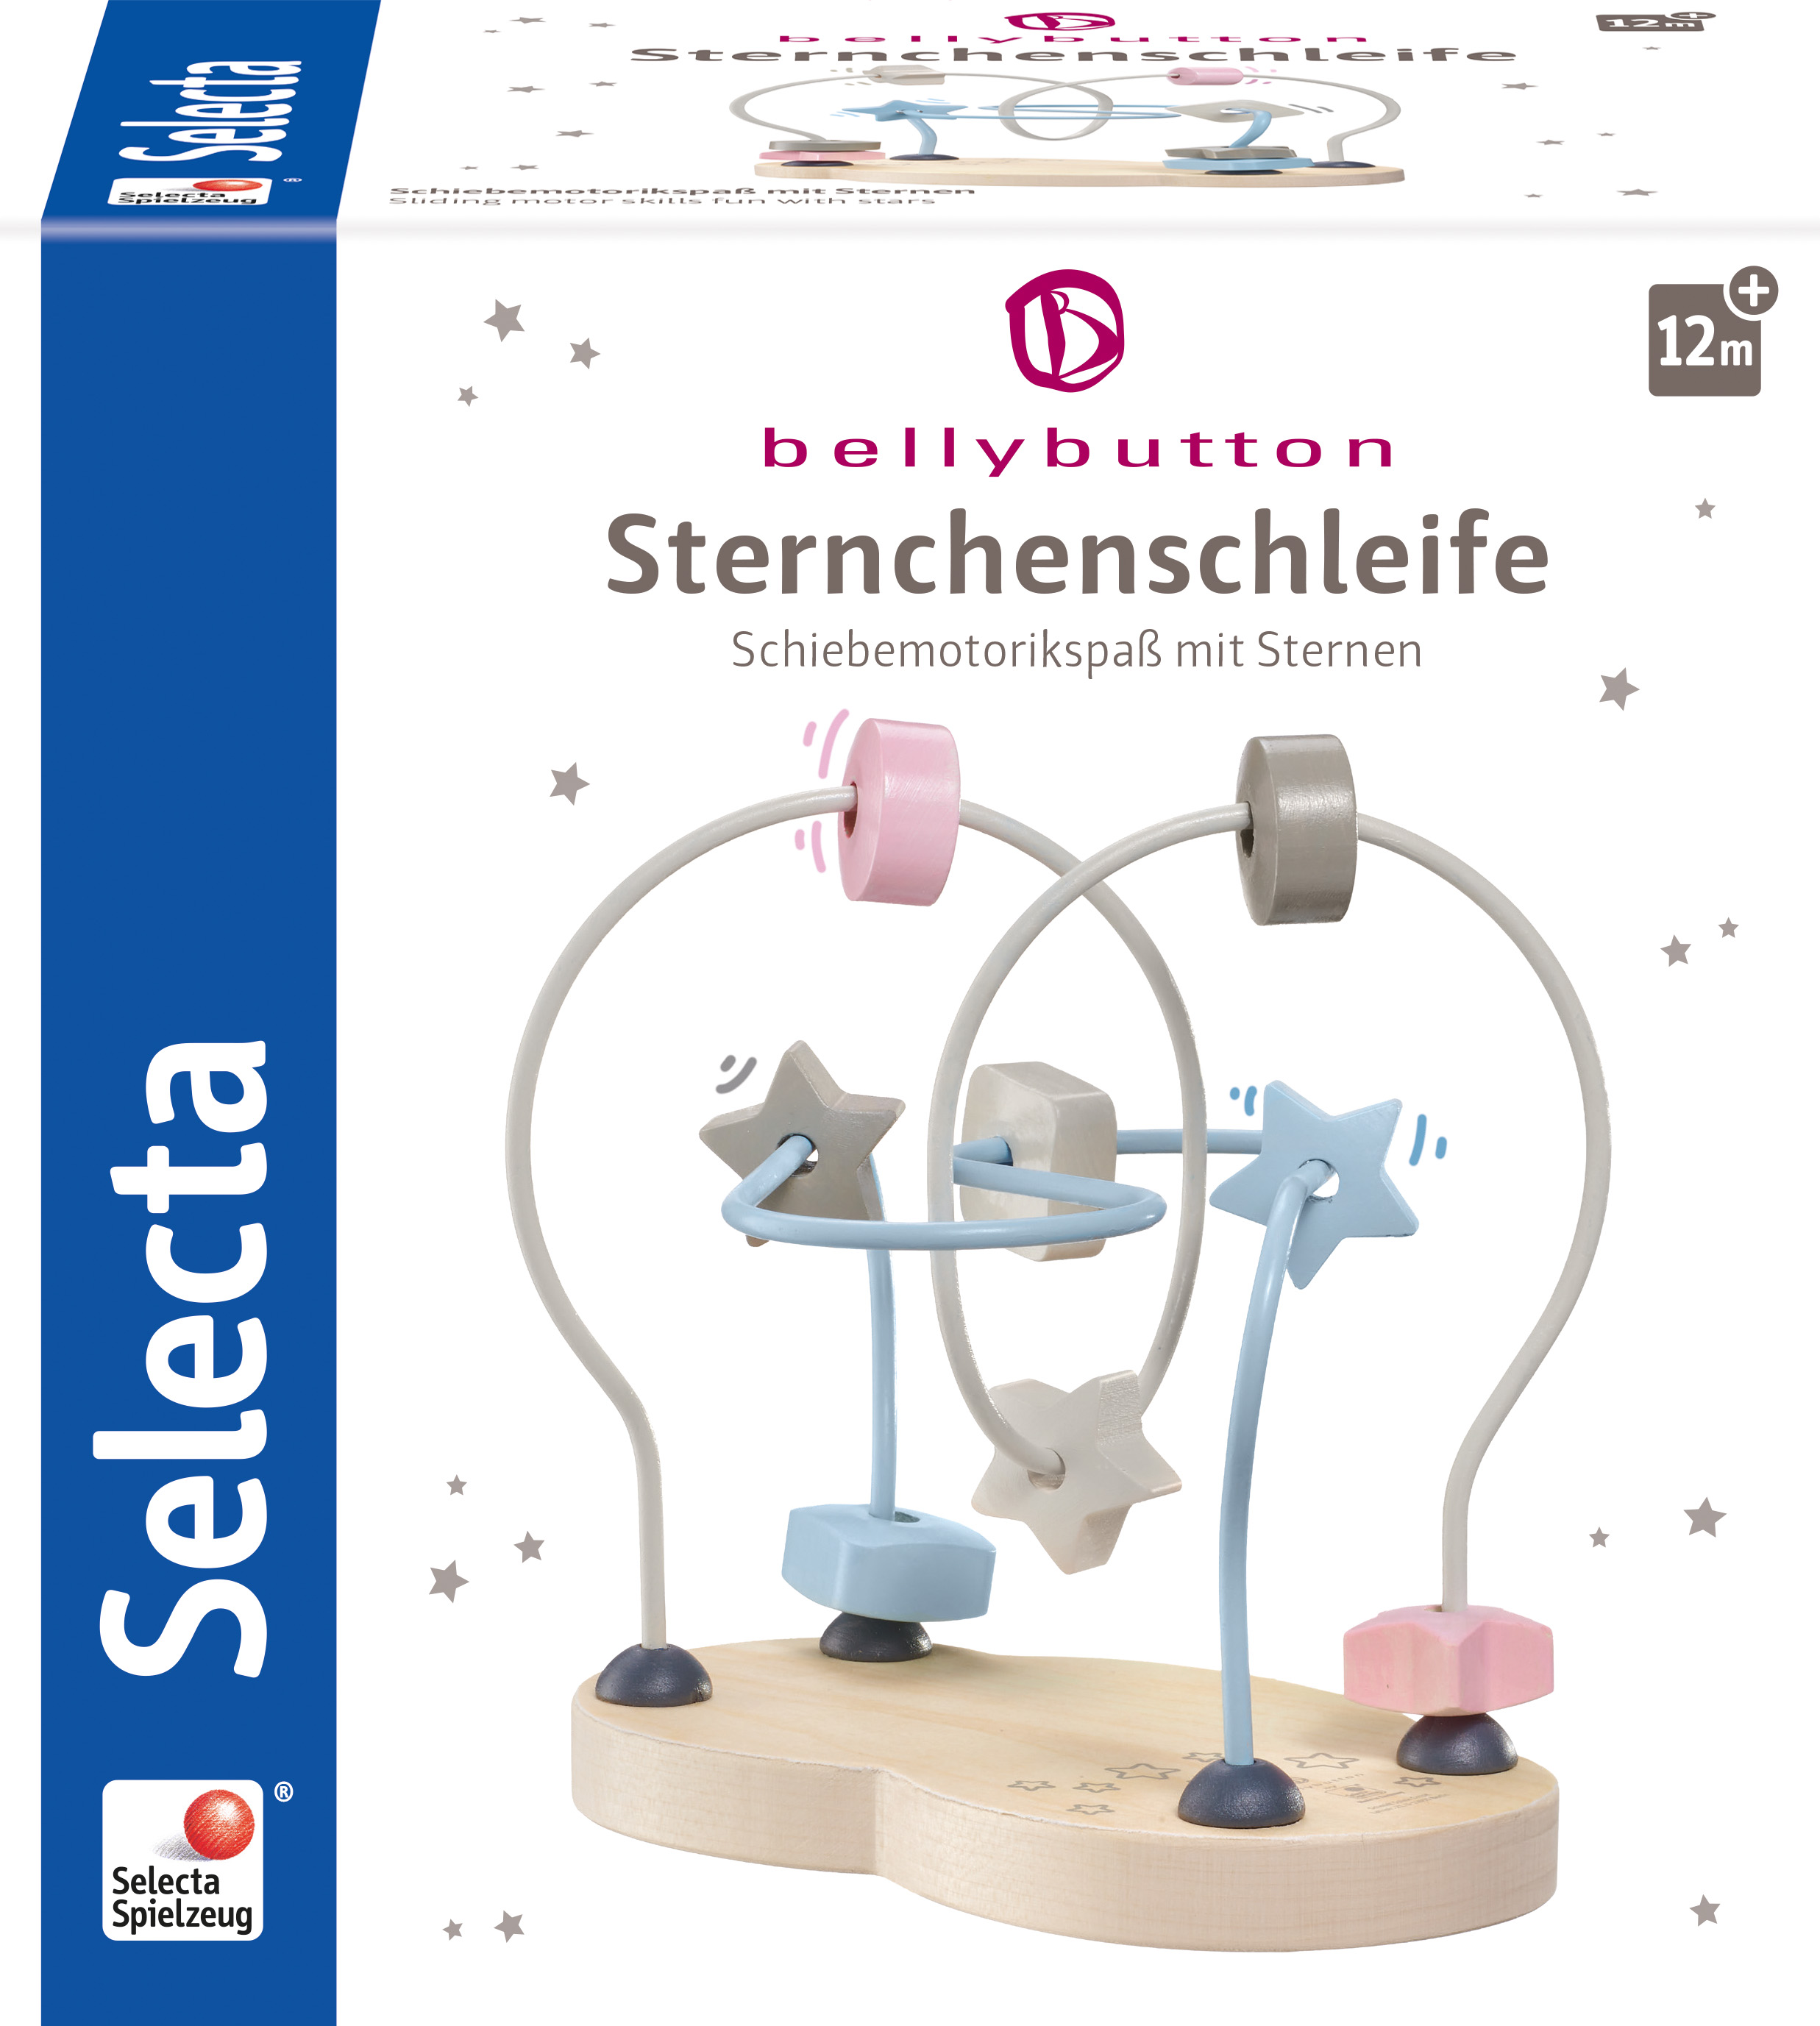 SELECTA bellybutton by Selecta® Holzspielzeug 18 Sternchenschleife, cm nein 